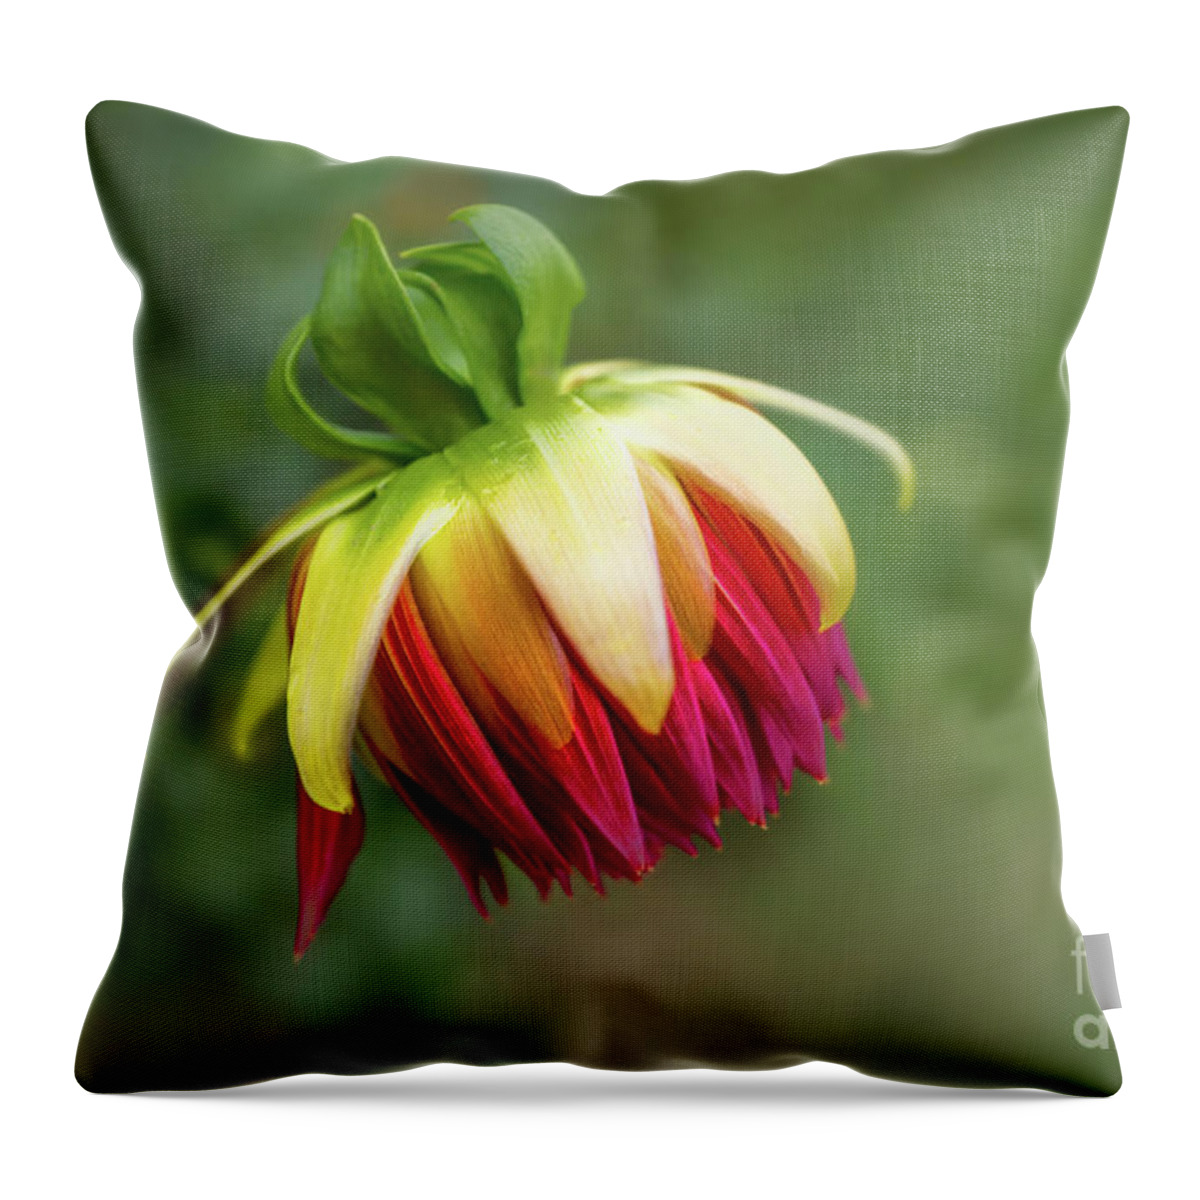 2016 Throw Pillow featuring the photograph Demure Dahlia Bud by Louise Lindsay